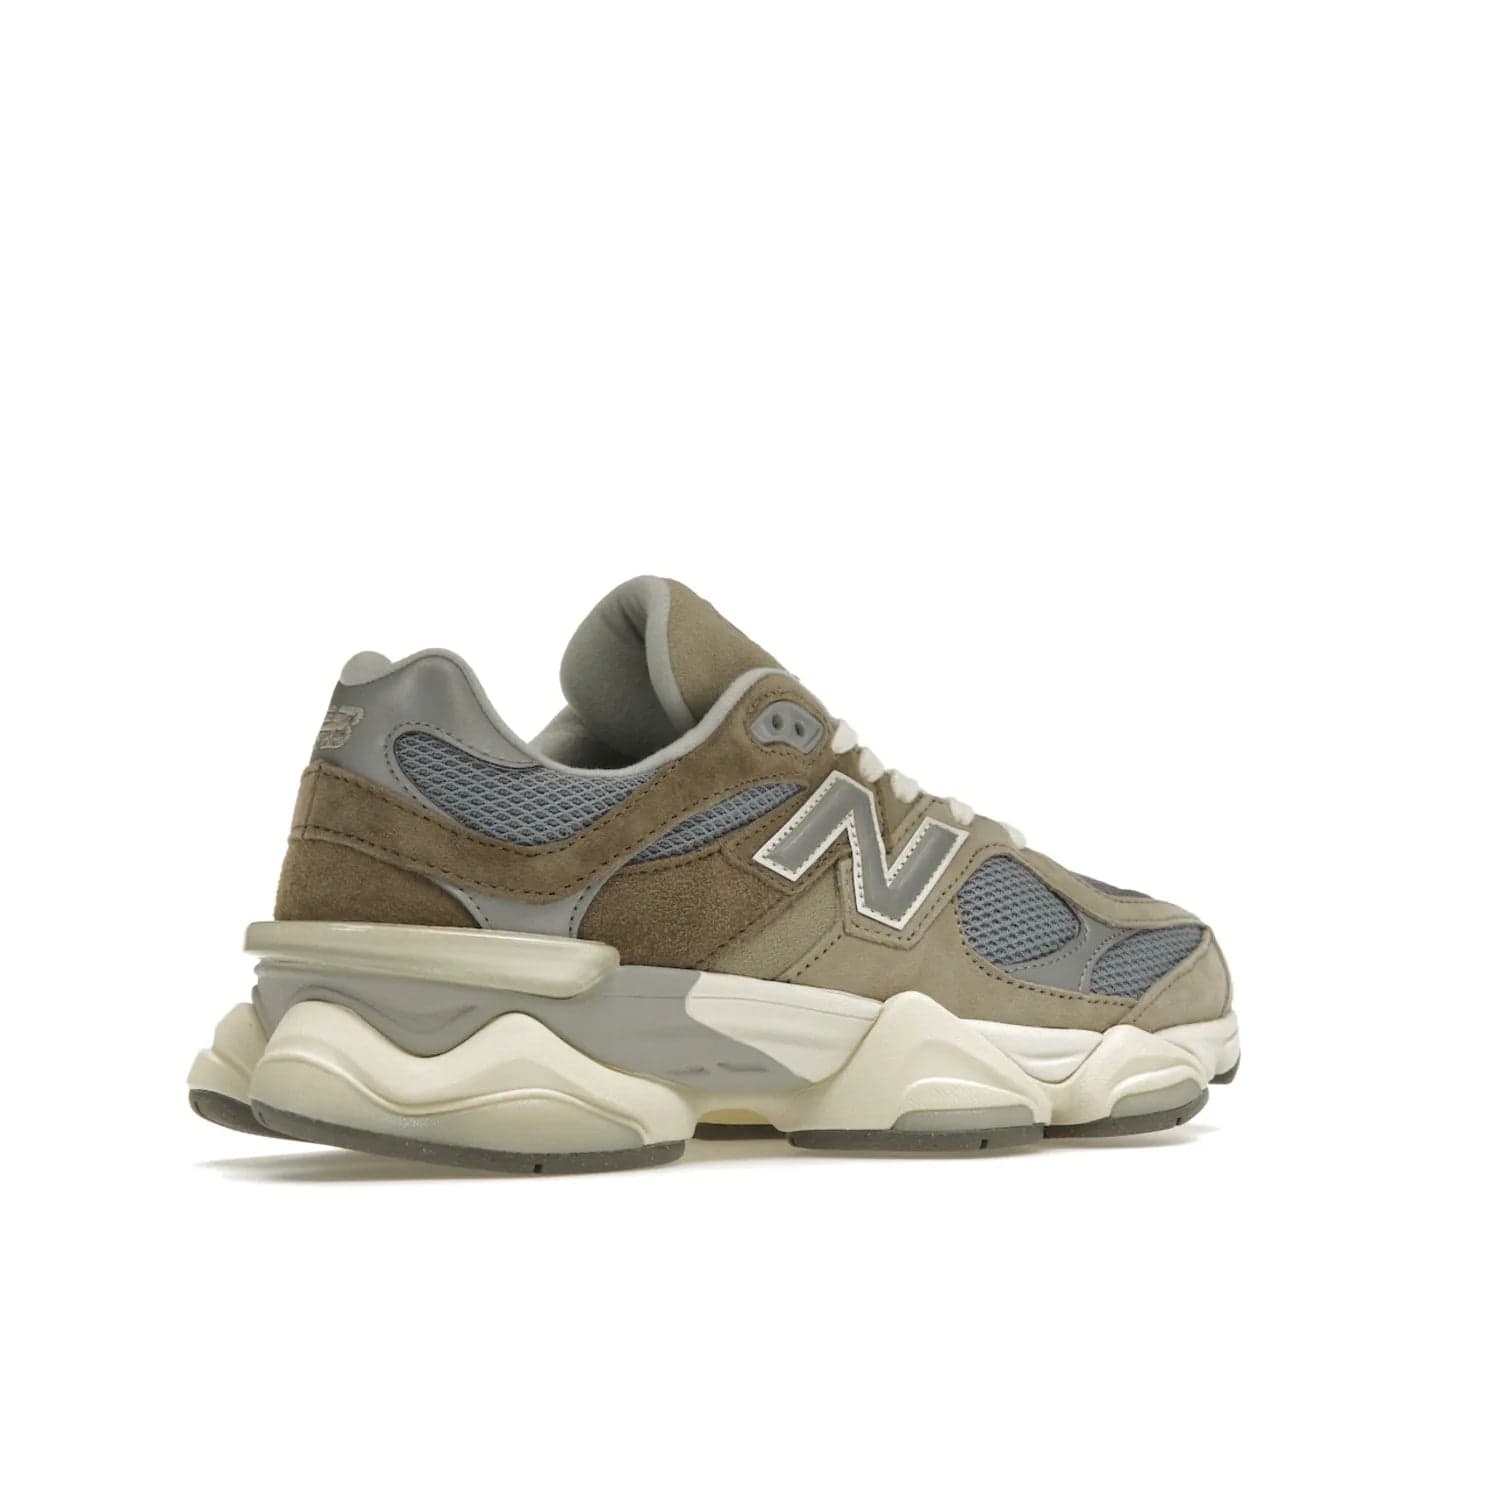 New Balance 9060 Mushroom - Image 34 - Only at www.BallersClubKickz.com - Get the New Balance 9060 Mushroom in stylish aluminum and mushroom tones. Featuring a porous mesh fabric with multiple suede overlays, a grey N symbol and rugged off-white/grey sole. Shop now and make a statement.